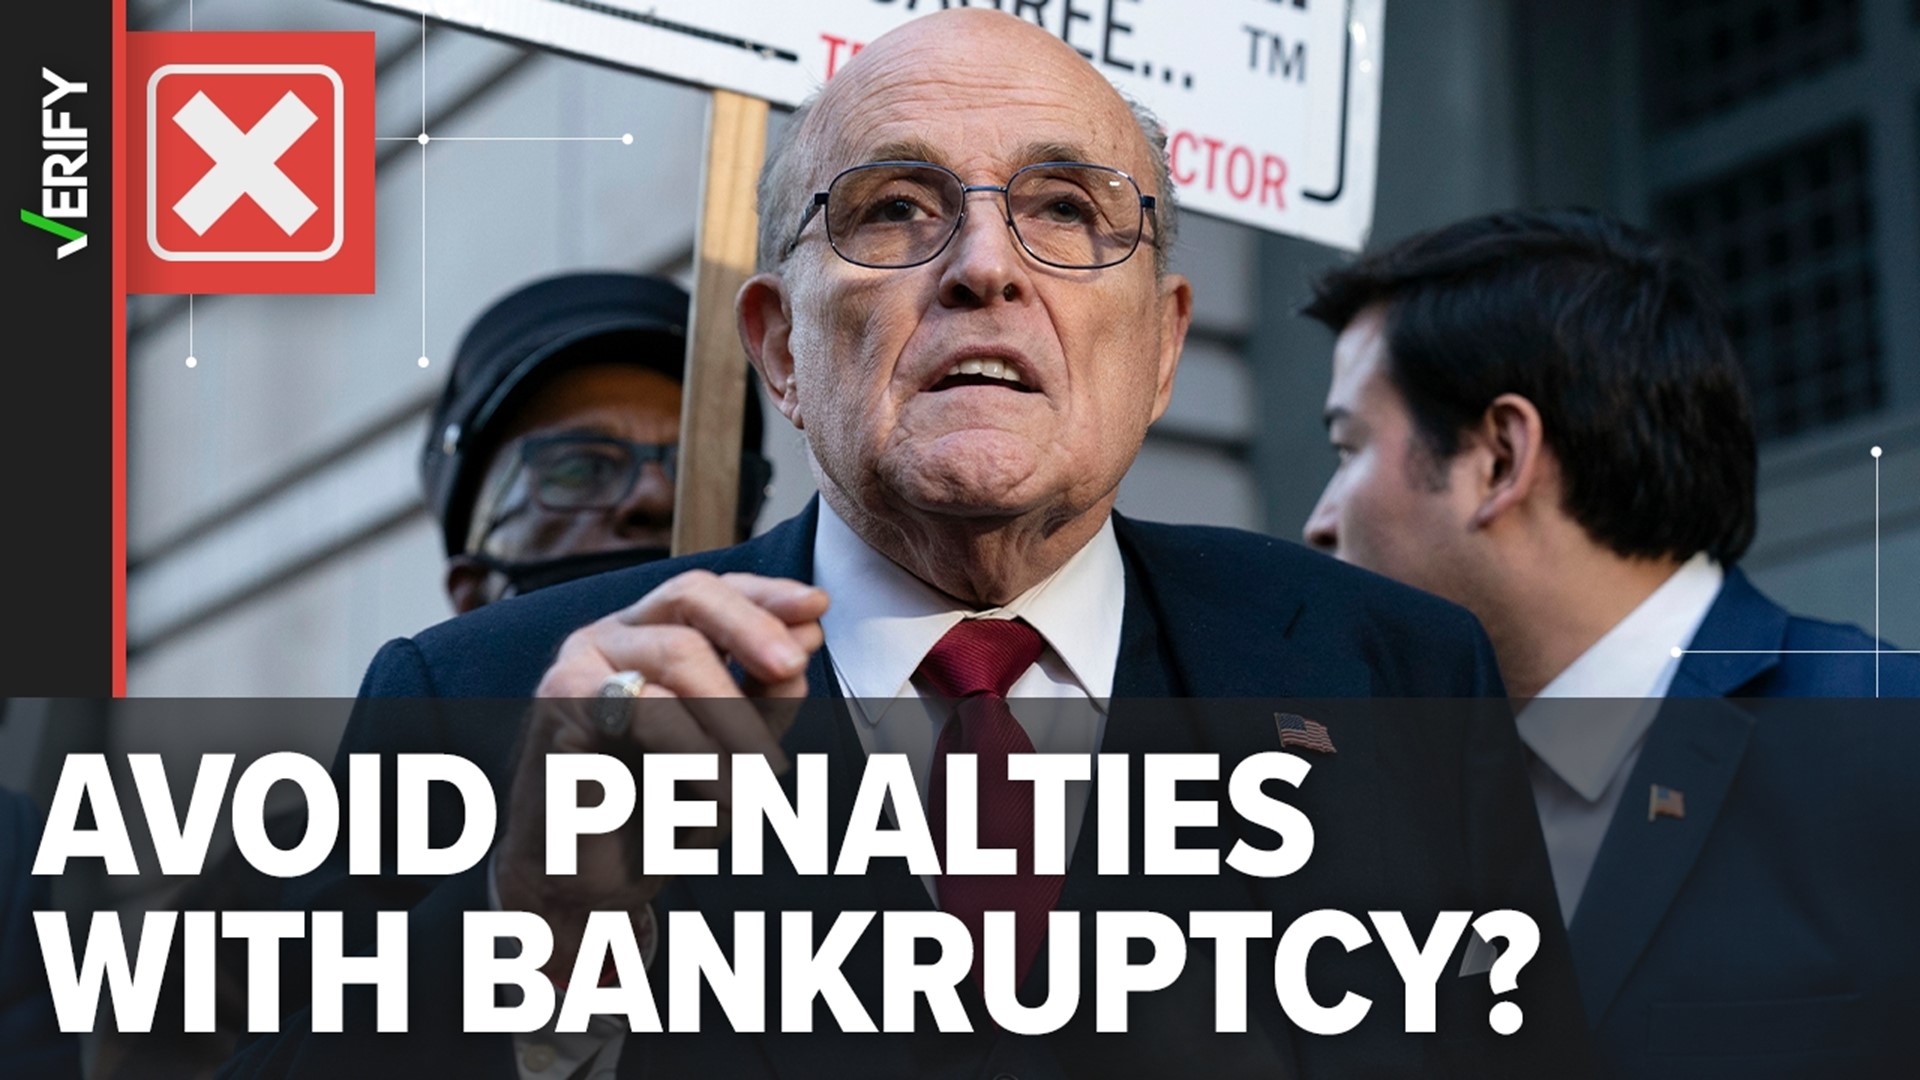 Giuliani filed for bankruptcy after being ordered to pay election workers over $1 million for defamation. He will likely still have to pay, despite Chapter 11 filing